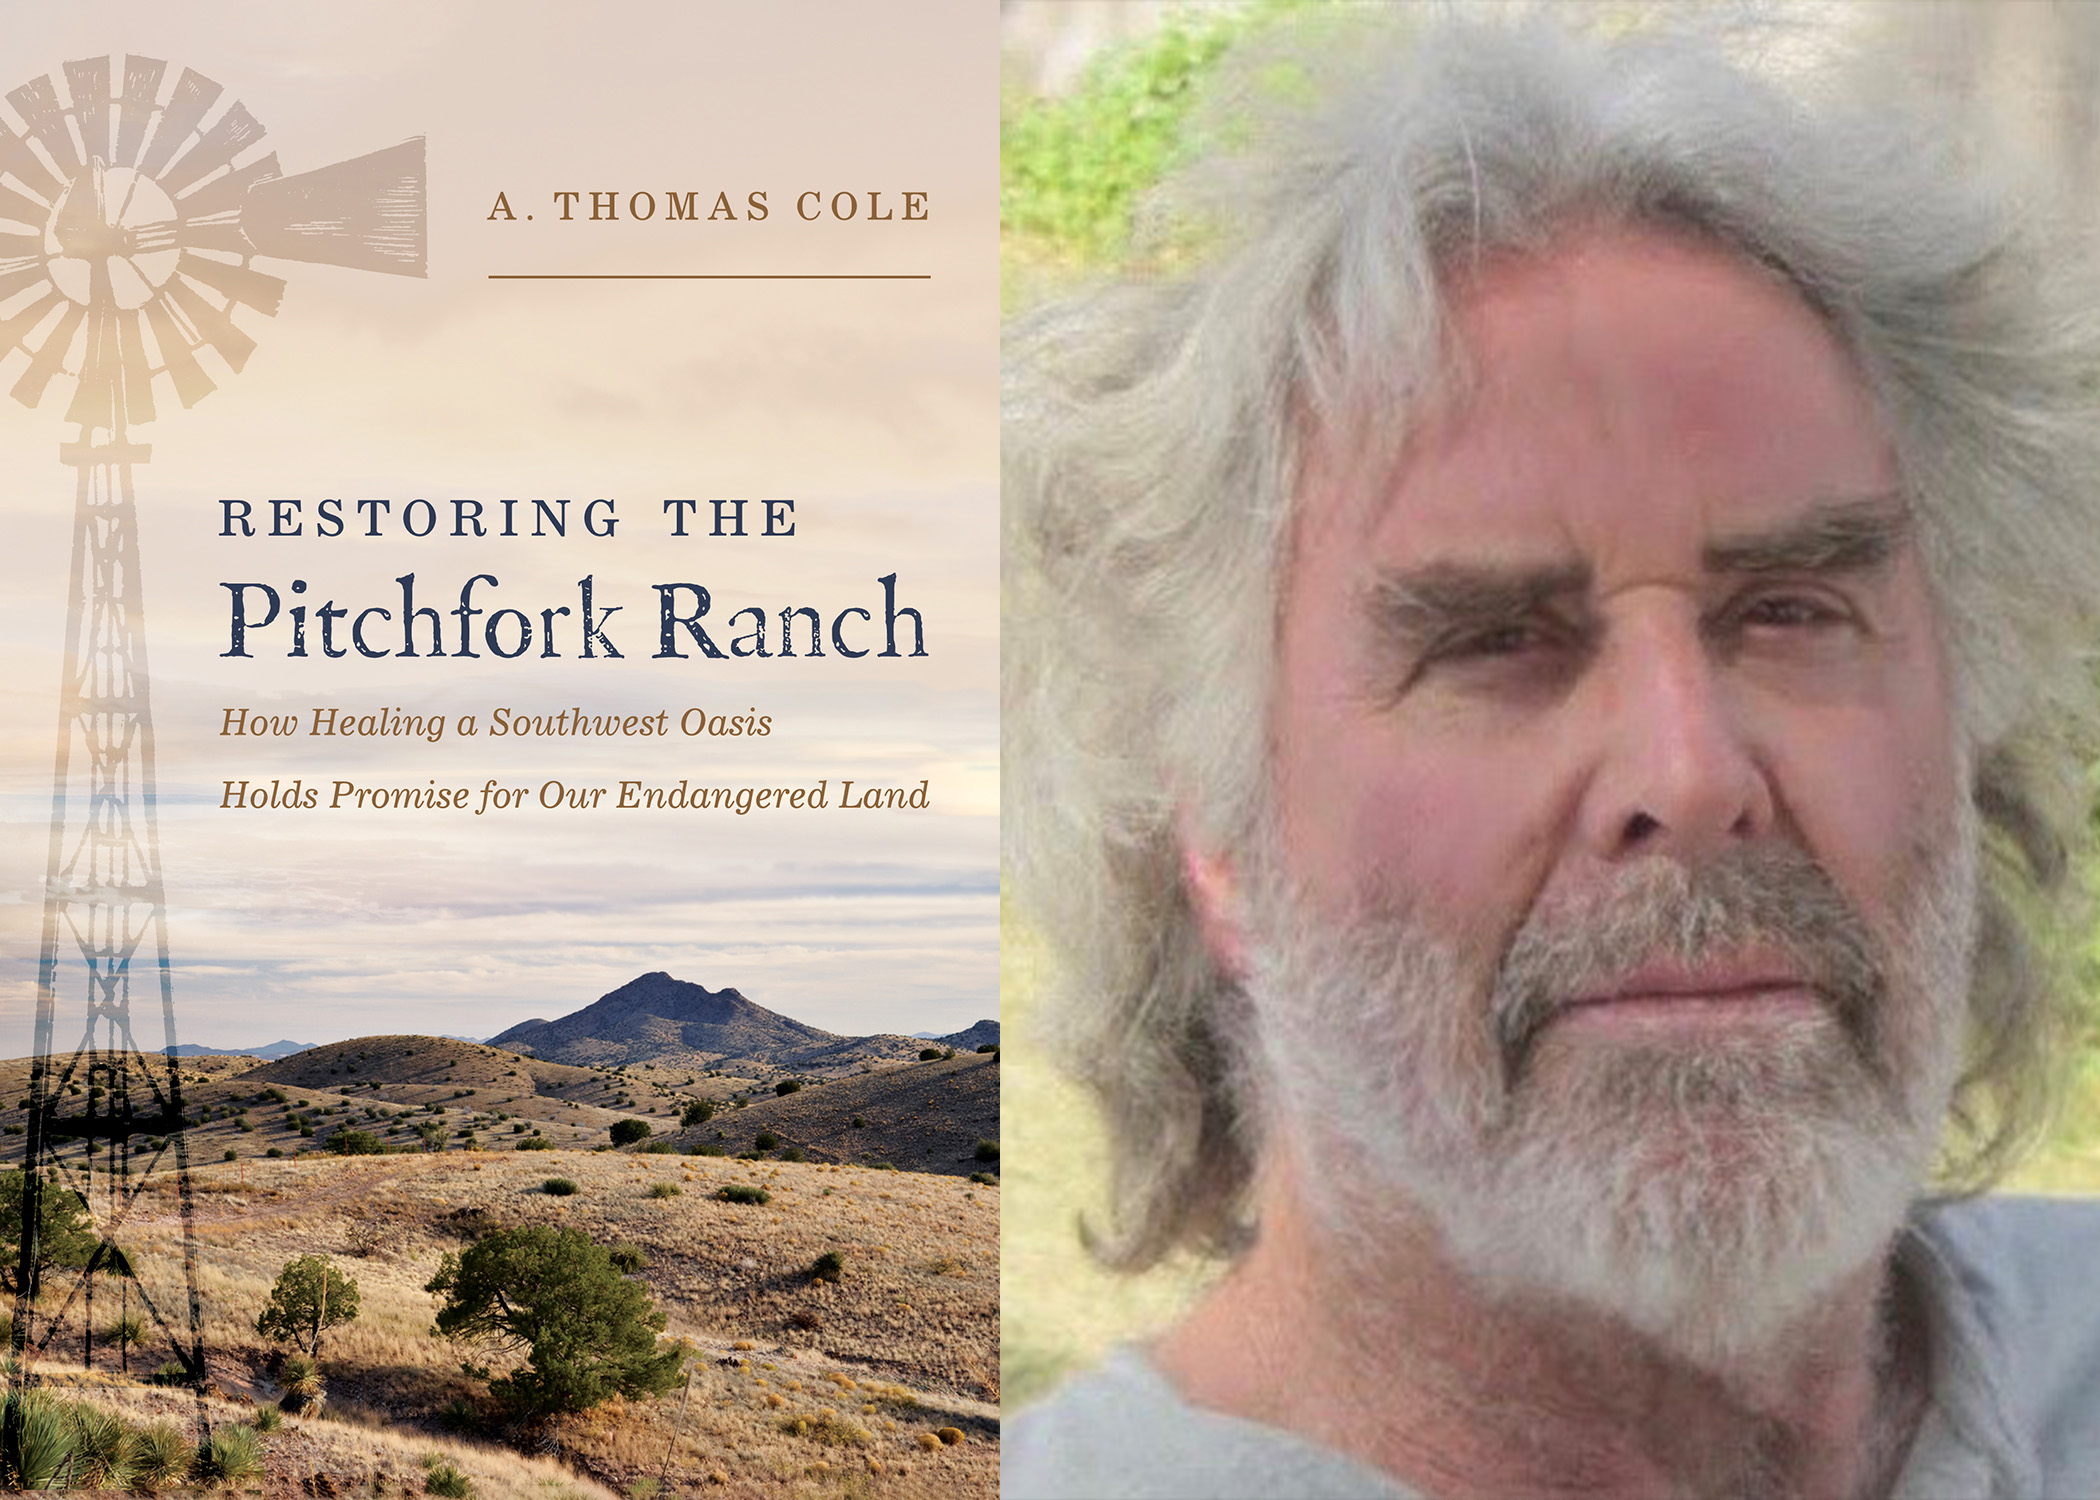 Pitchfork Ranch book cover on left and picture of book author, A. Thomas Cole on right.